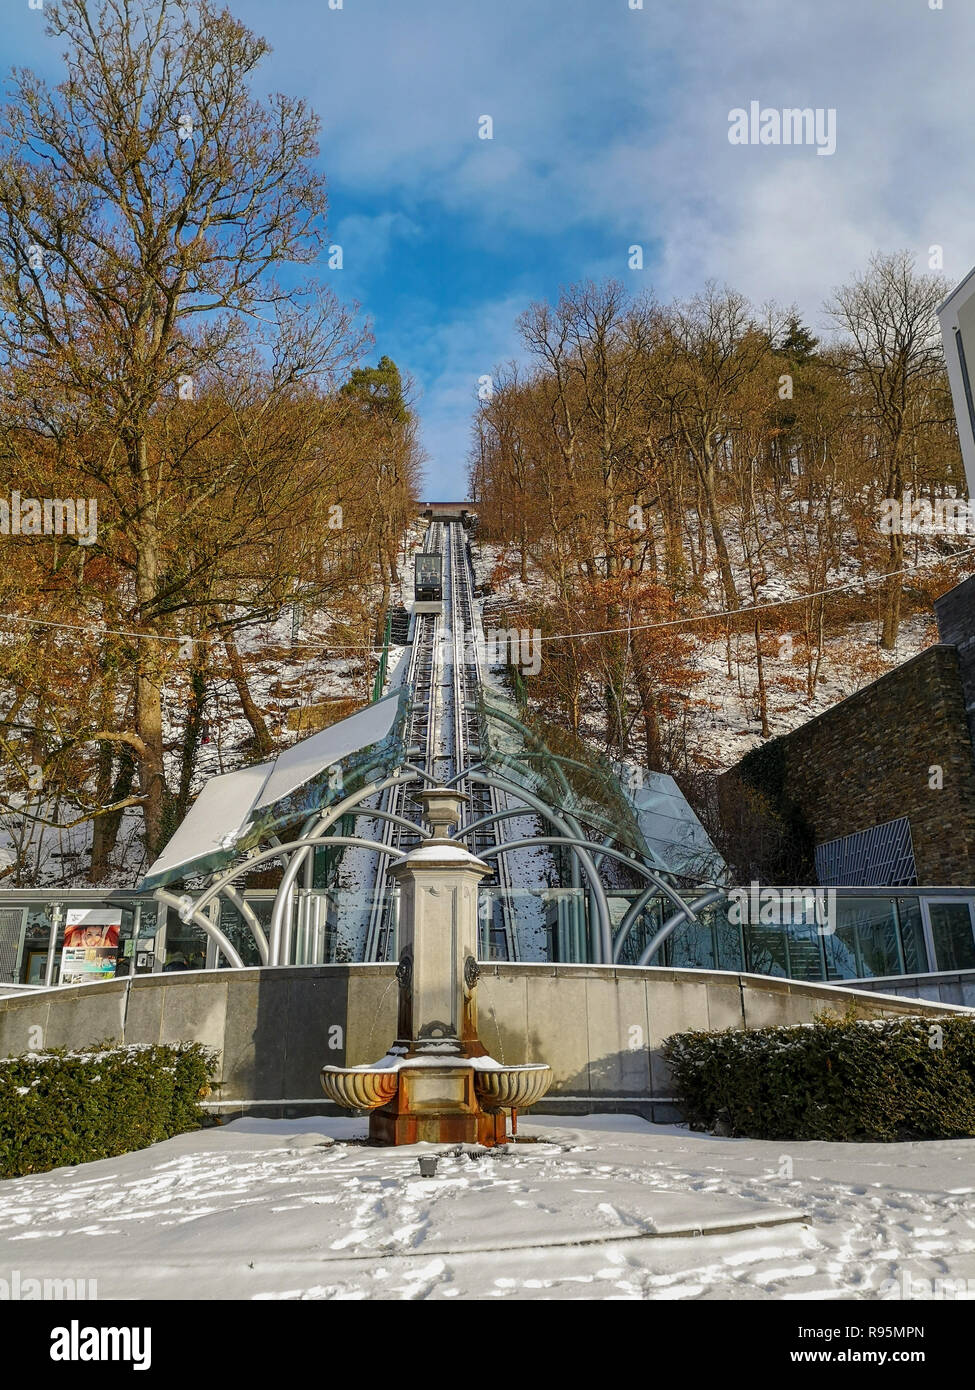 Cable car from the city center of Spa ( Belgium) to the main minerals baths of Thermes de Spa. Spa is famous for its numerous mineral springs. Stock Photo